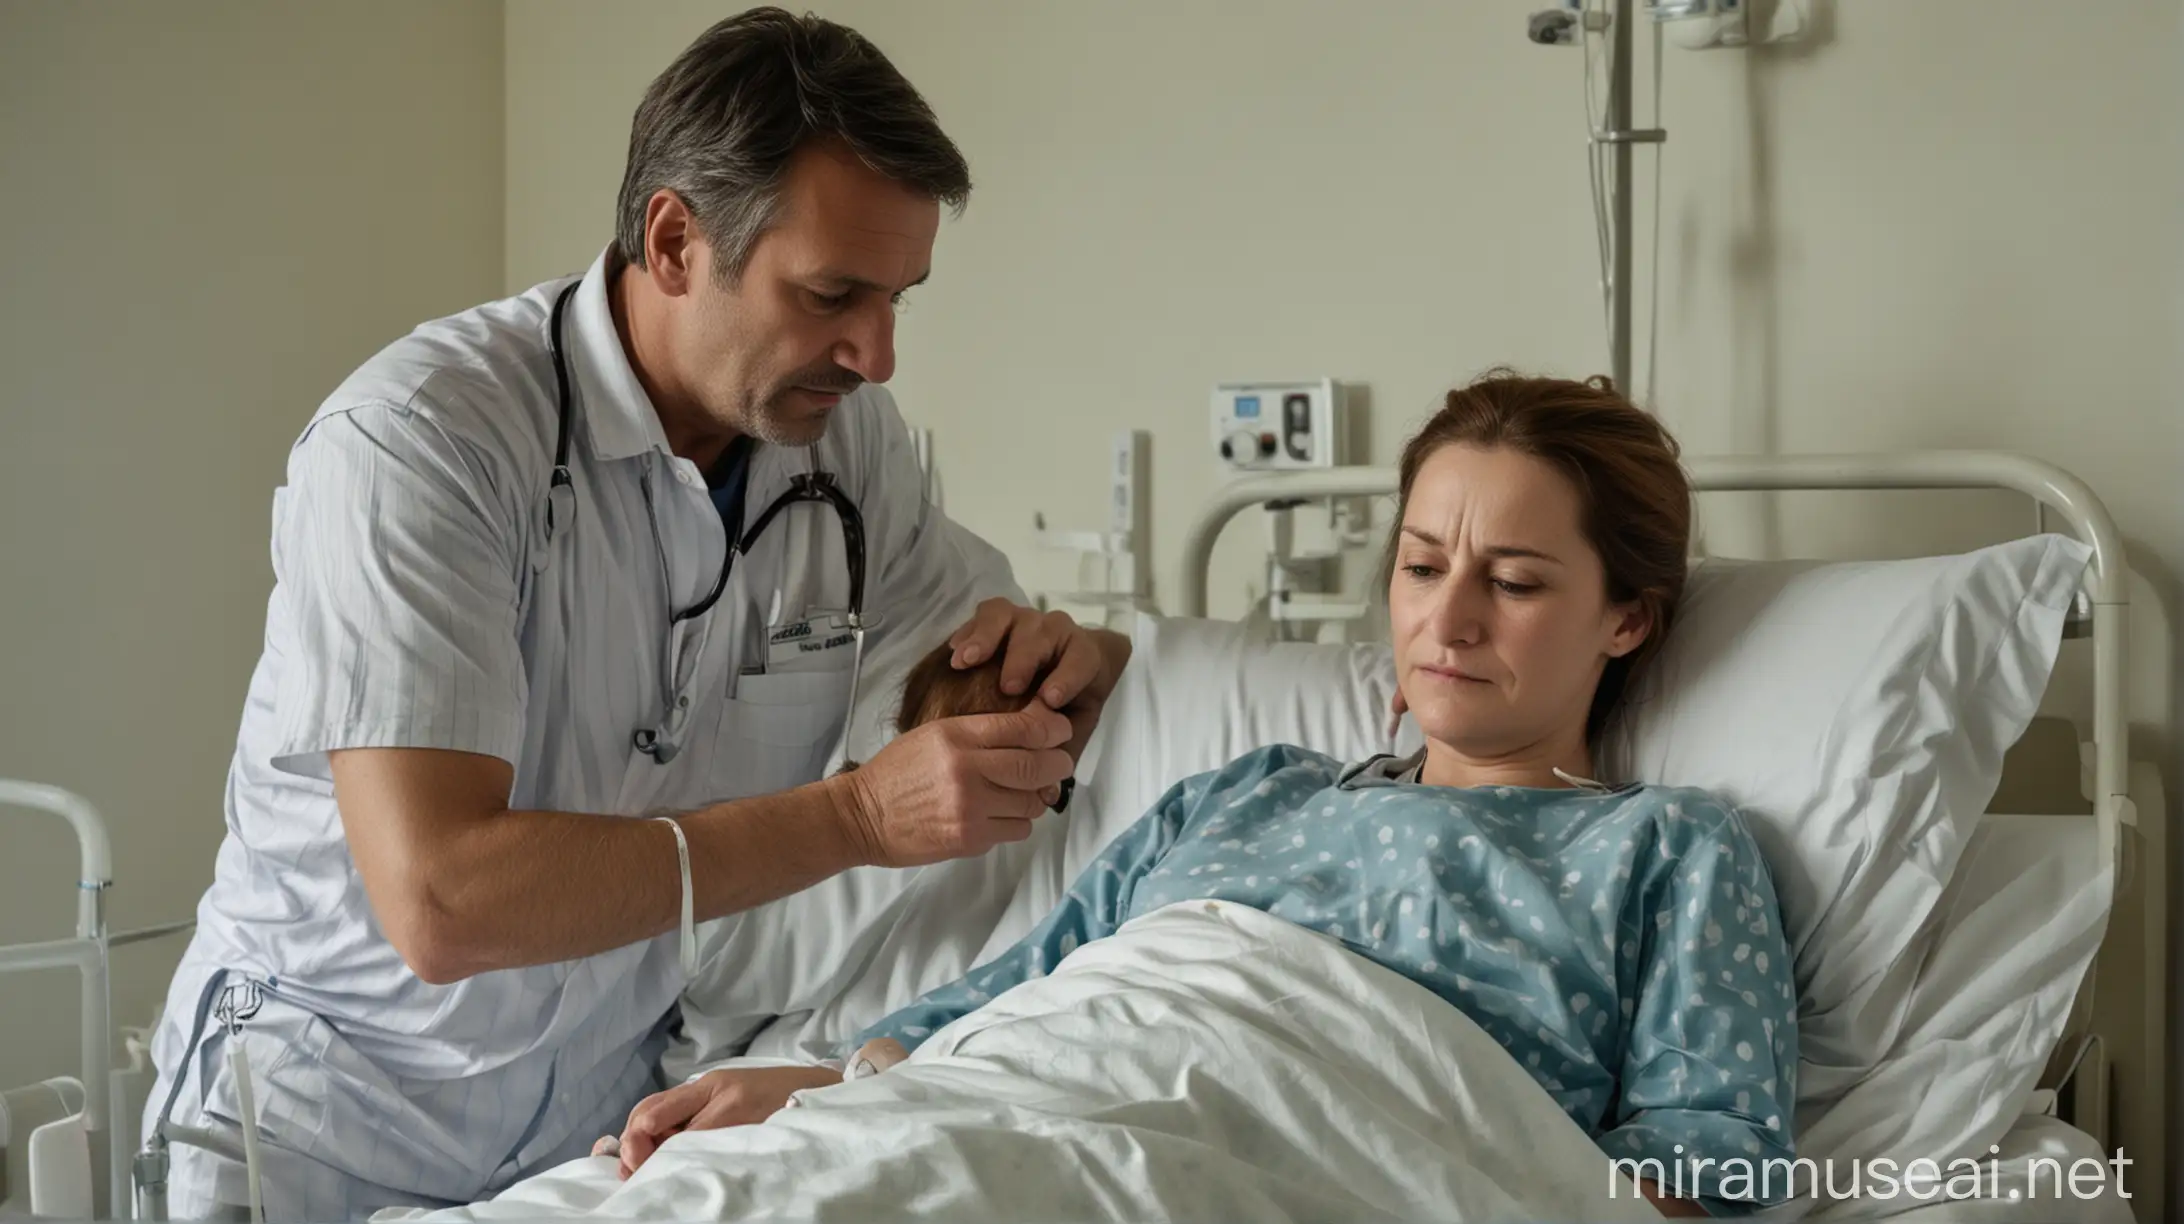 MiddleAged Man Caring for Sick Woman in Hospital